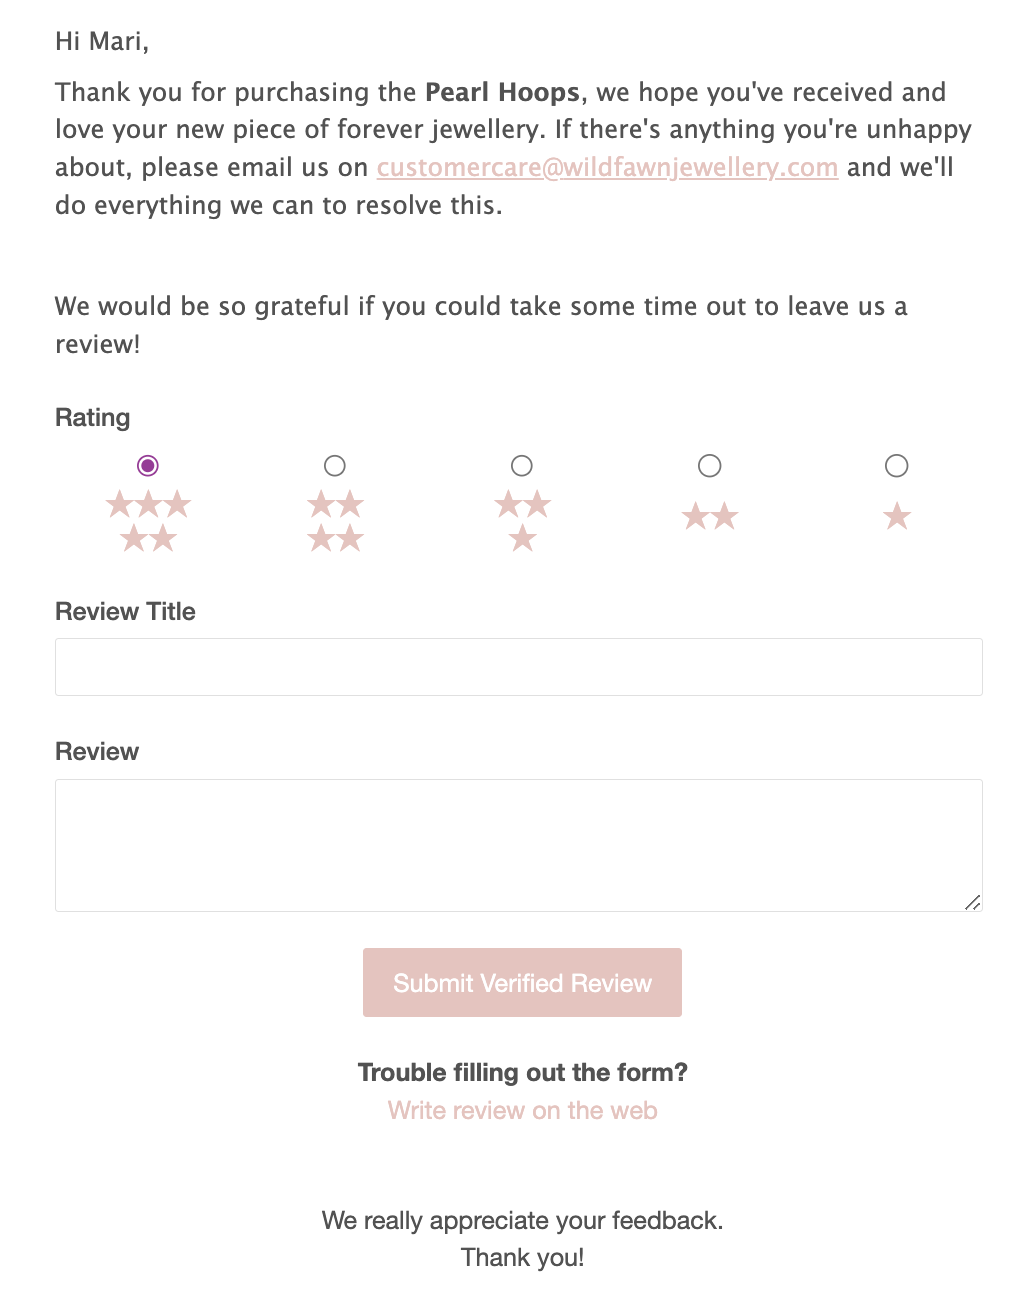 Wild Fawn email review example - how to ask customer for review